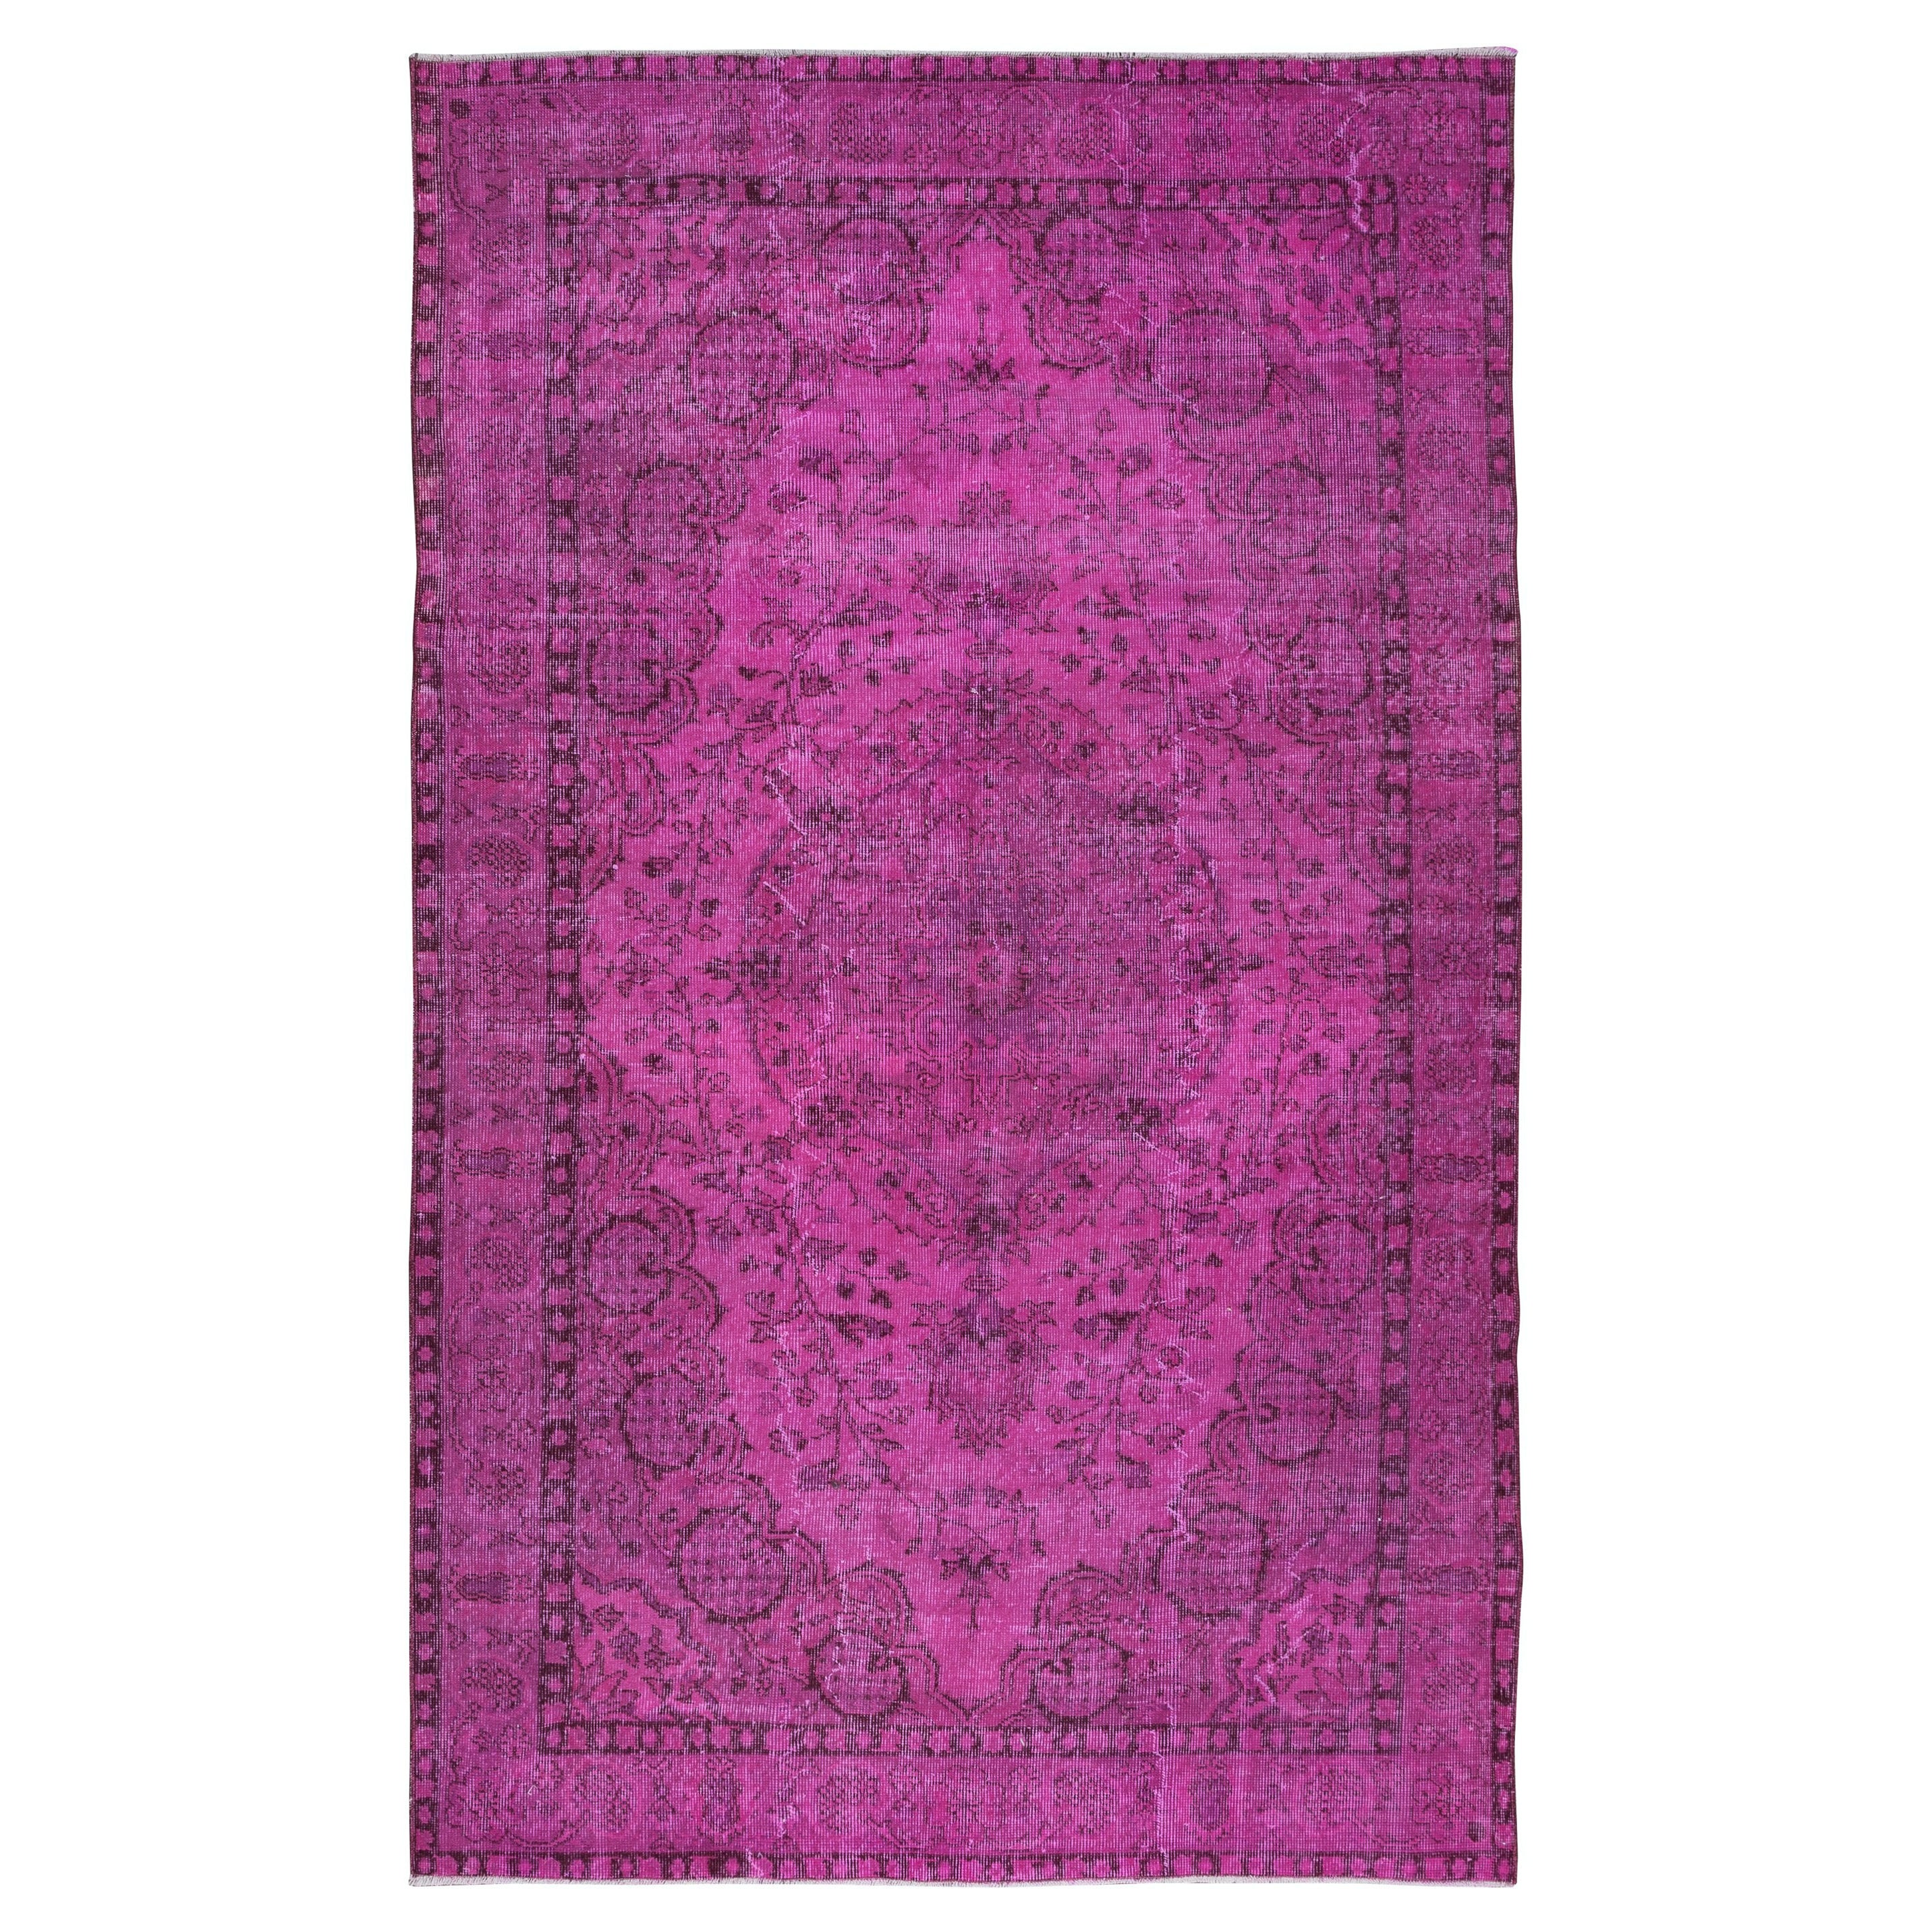 5.6x9 Ft Pink Handmade Turkish Wool Area Rug, Contemporary Low Pile Carpet